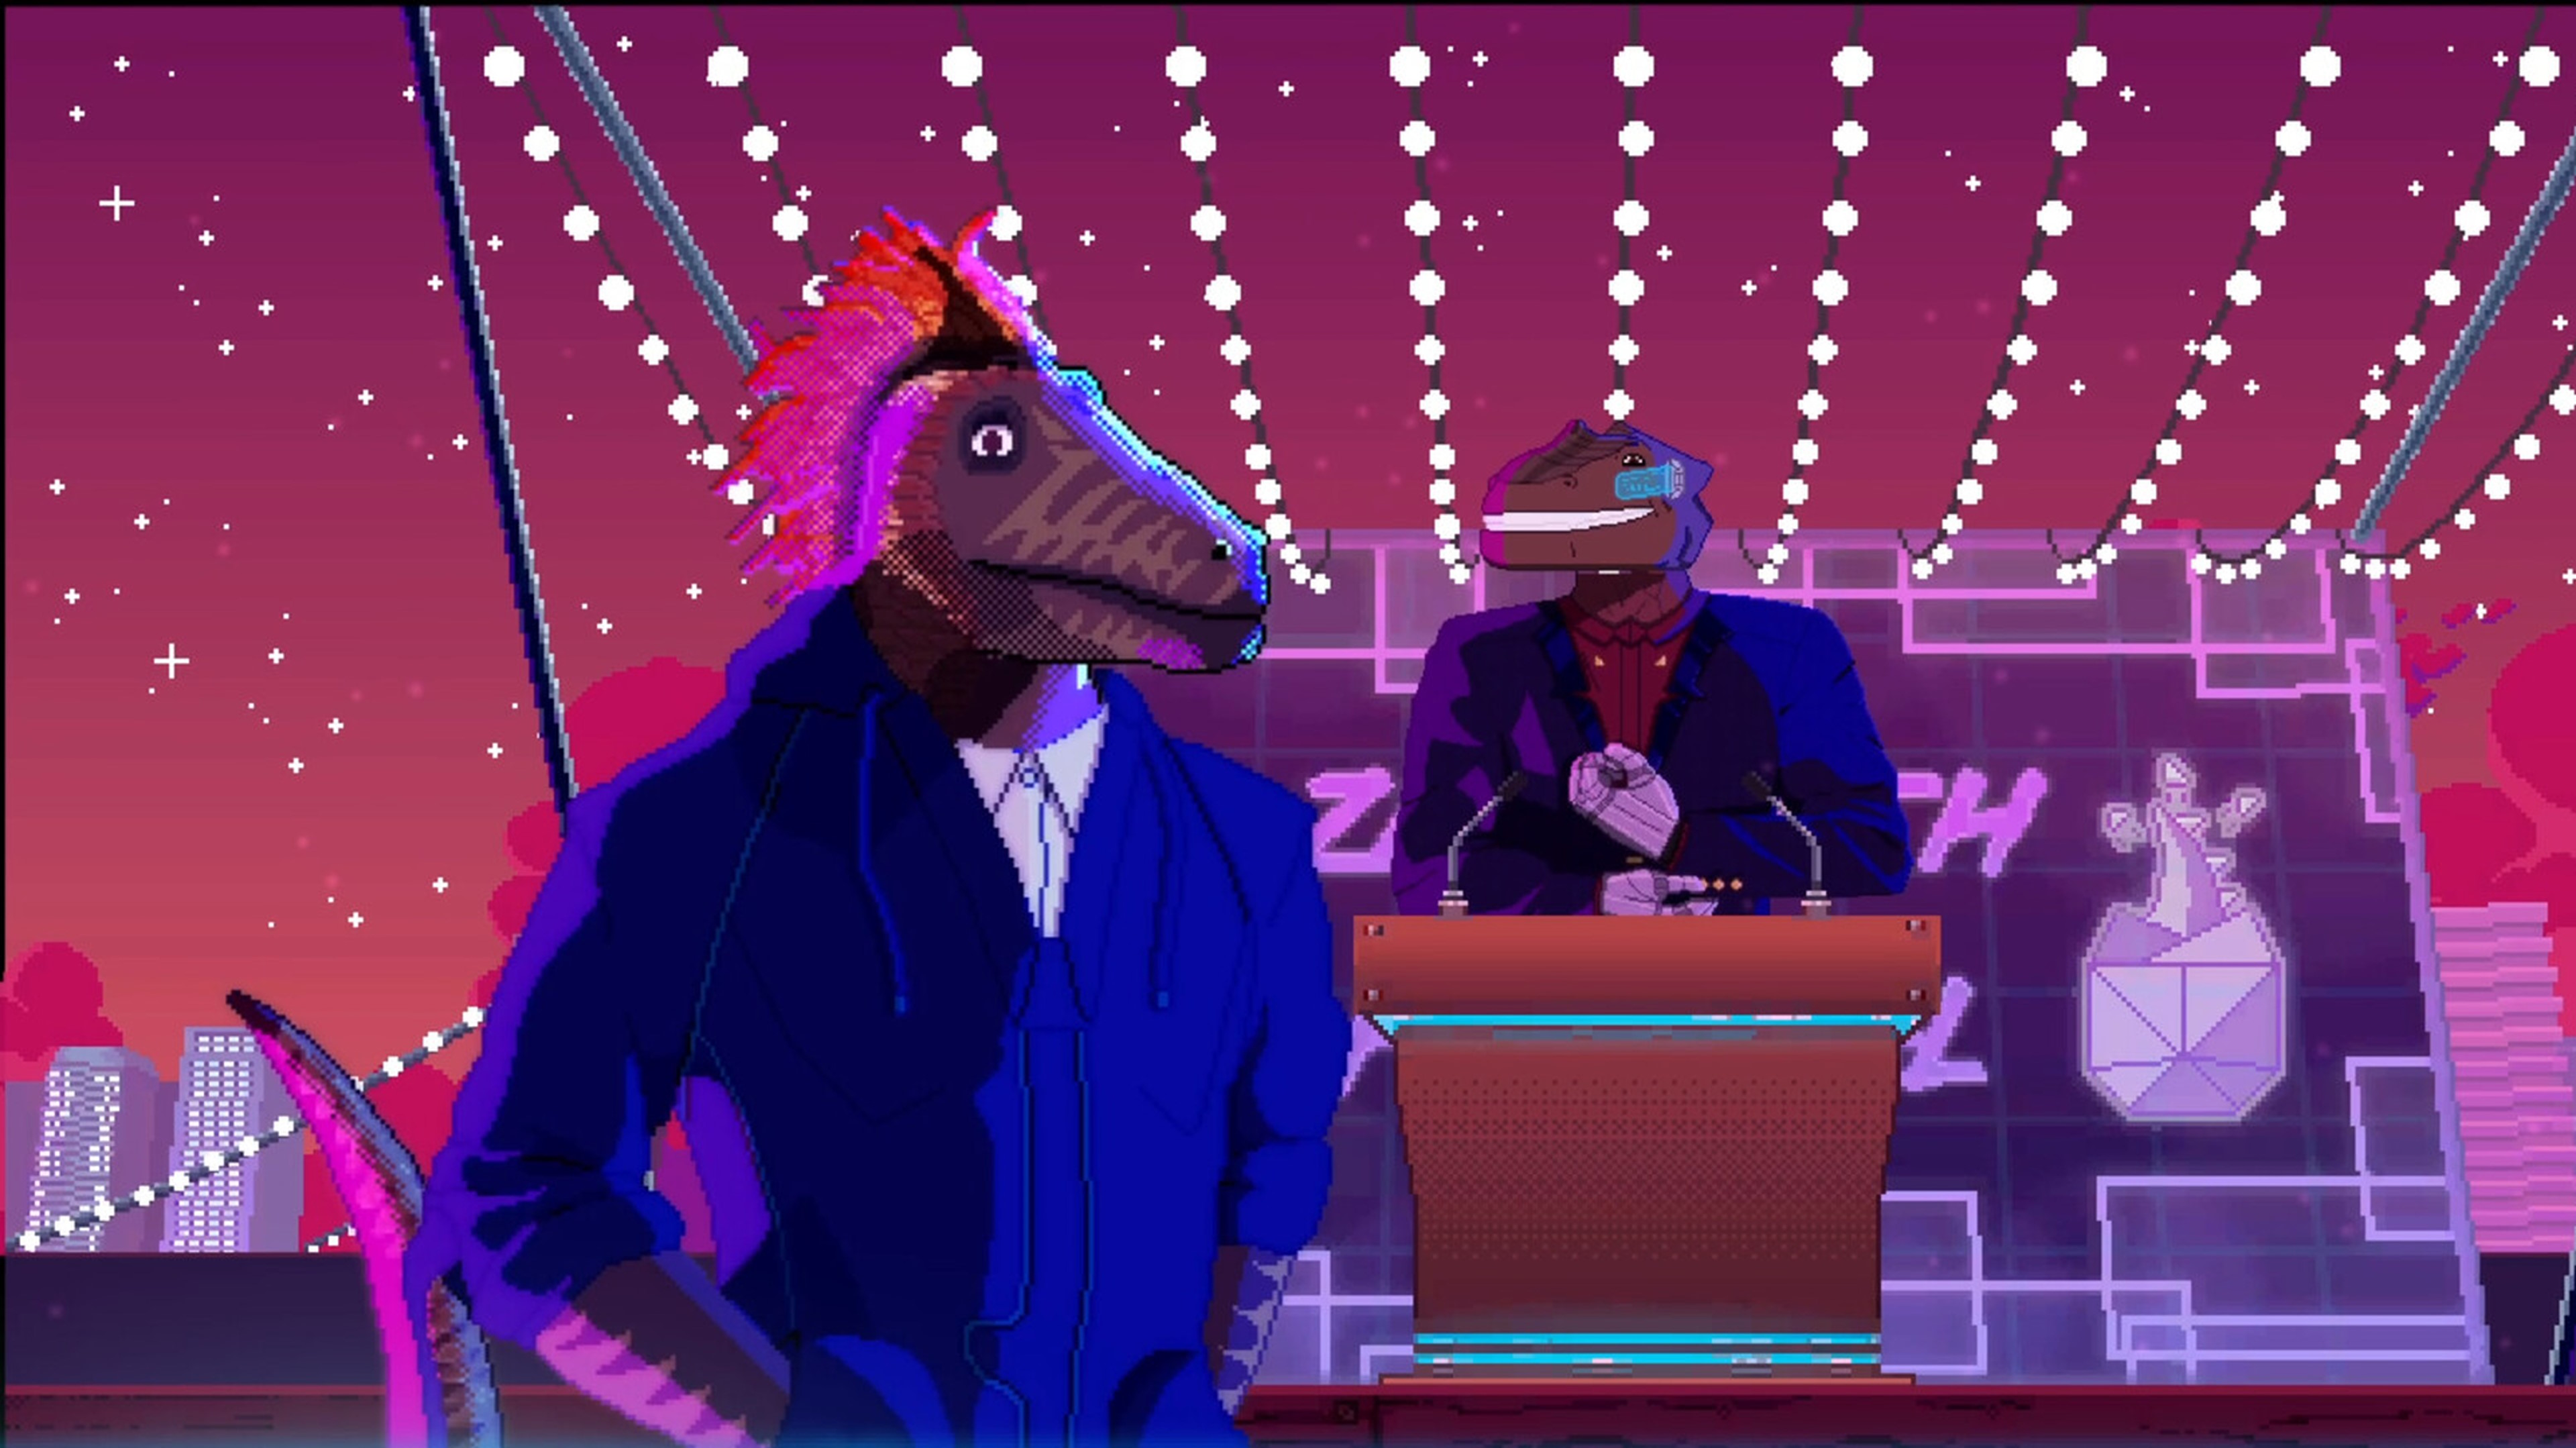  You're a cyberpunk T. Rex using your tiny arms to fix electronics in this 'ironic' retro adventure about customer service, time travel, and true love 